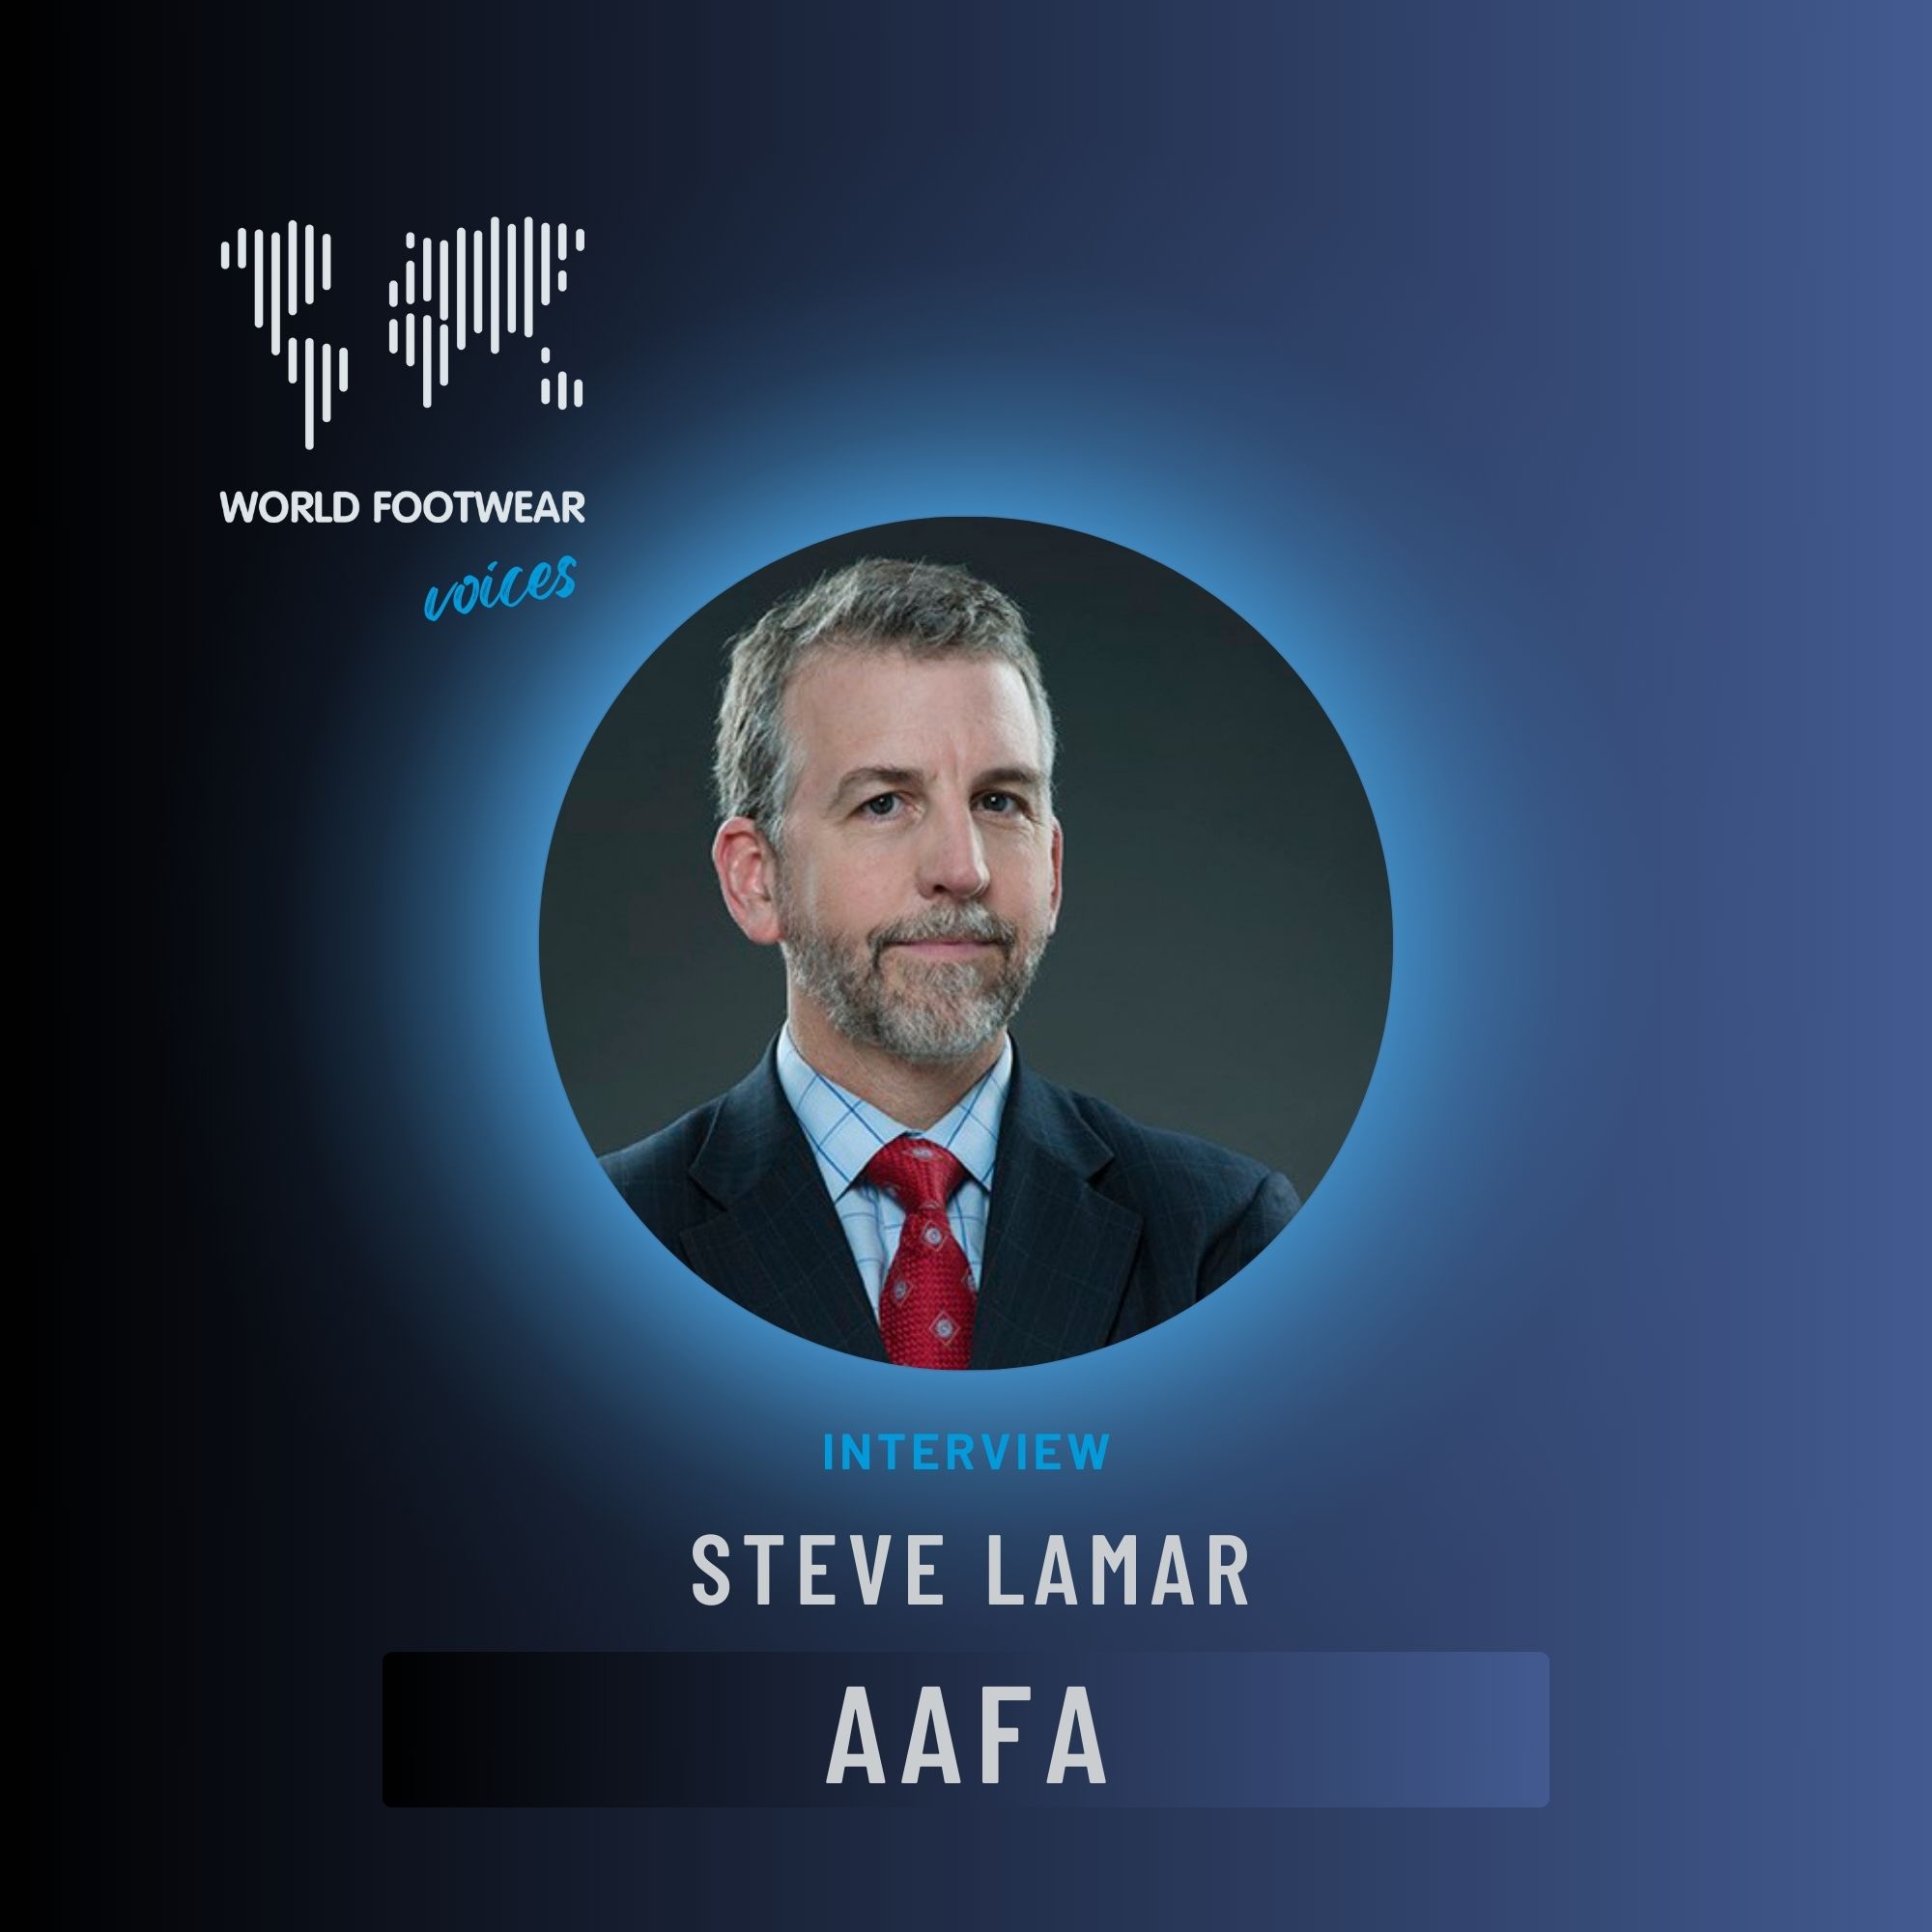 World Footwear Voices: interview with Steve Lamar from AAFA